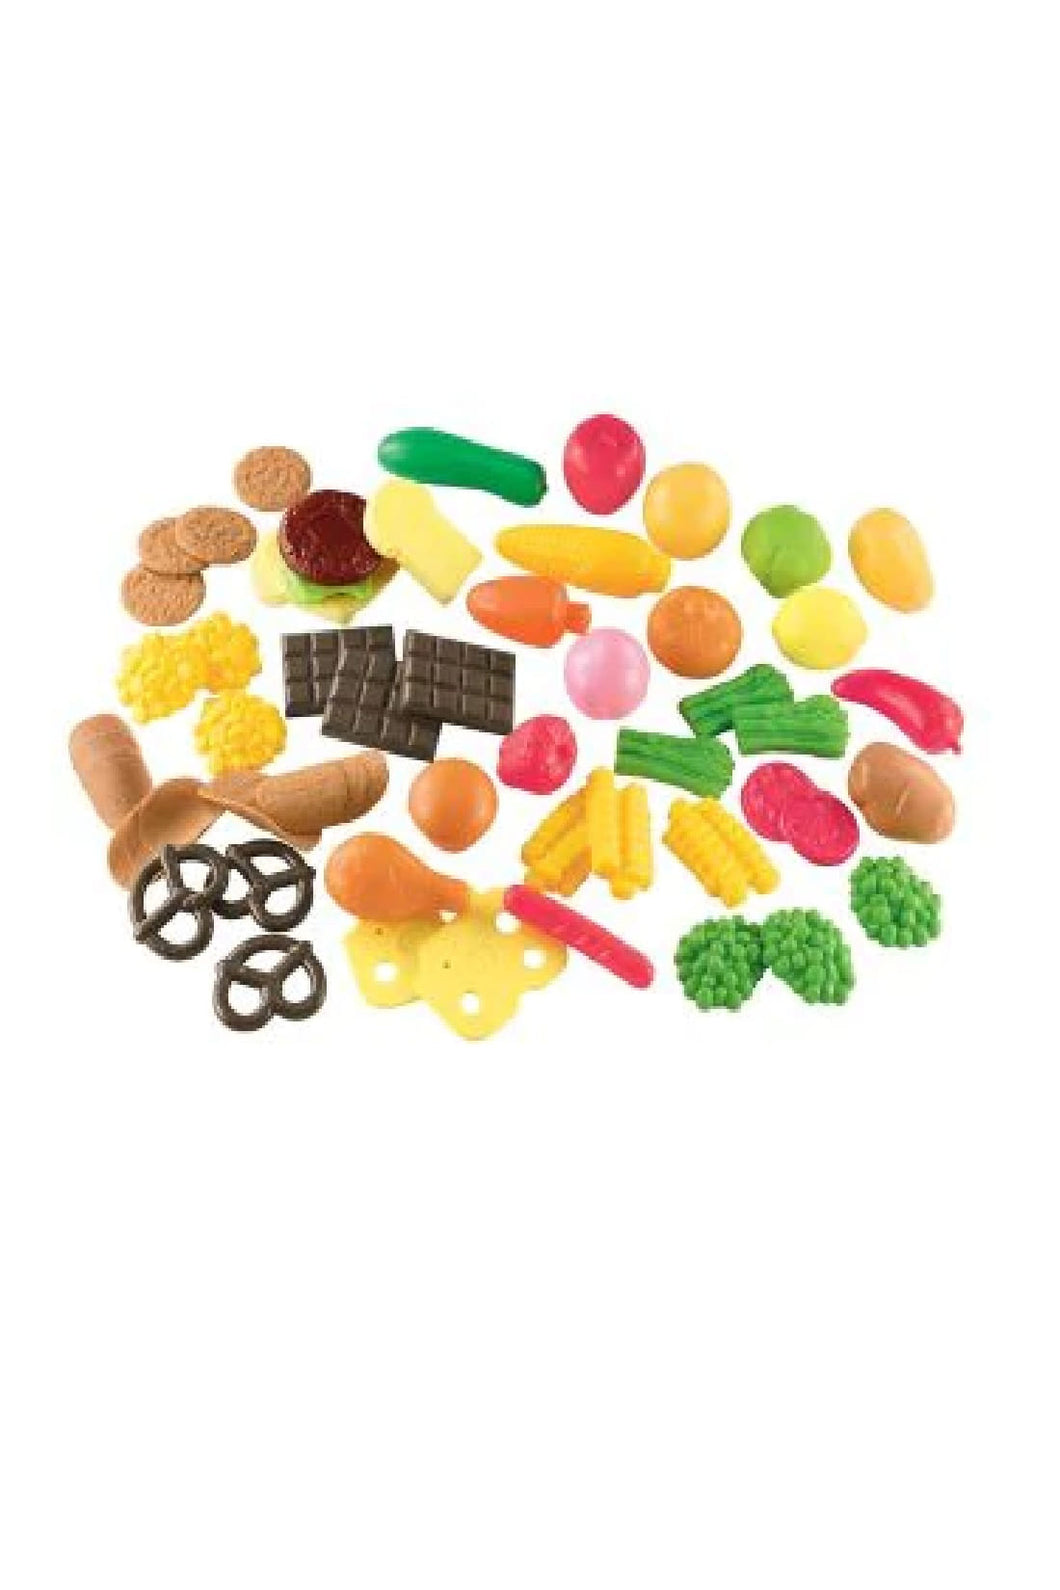 Early Learning Centre Bumper Play Food Set